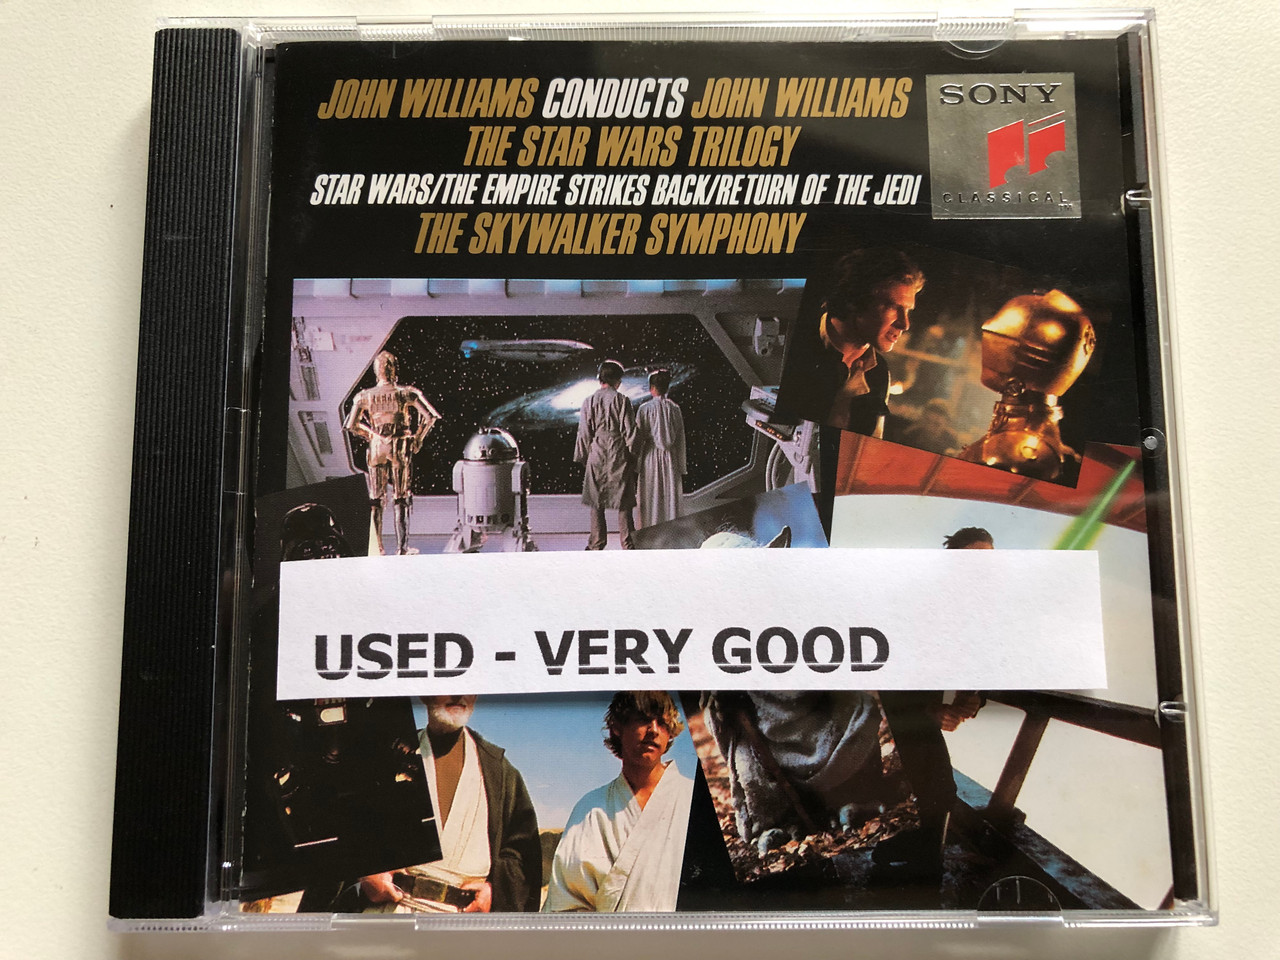 https://cdn10.bigcommerce.com/s-62bdpkt7pb/products/0/images/313158/John_Williams_Conducts_John_Williams_-_The_Star_Wars_Trilogy_Star_Wars_The_Empire_Strikes_Back_Return_Of_The_Jedi_-_The_Skywalker_Symphony_Sony_Classical_Audio_CD_1990_SK_45947_11__80119.1700558404.1280.1280.JPG?c=2